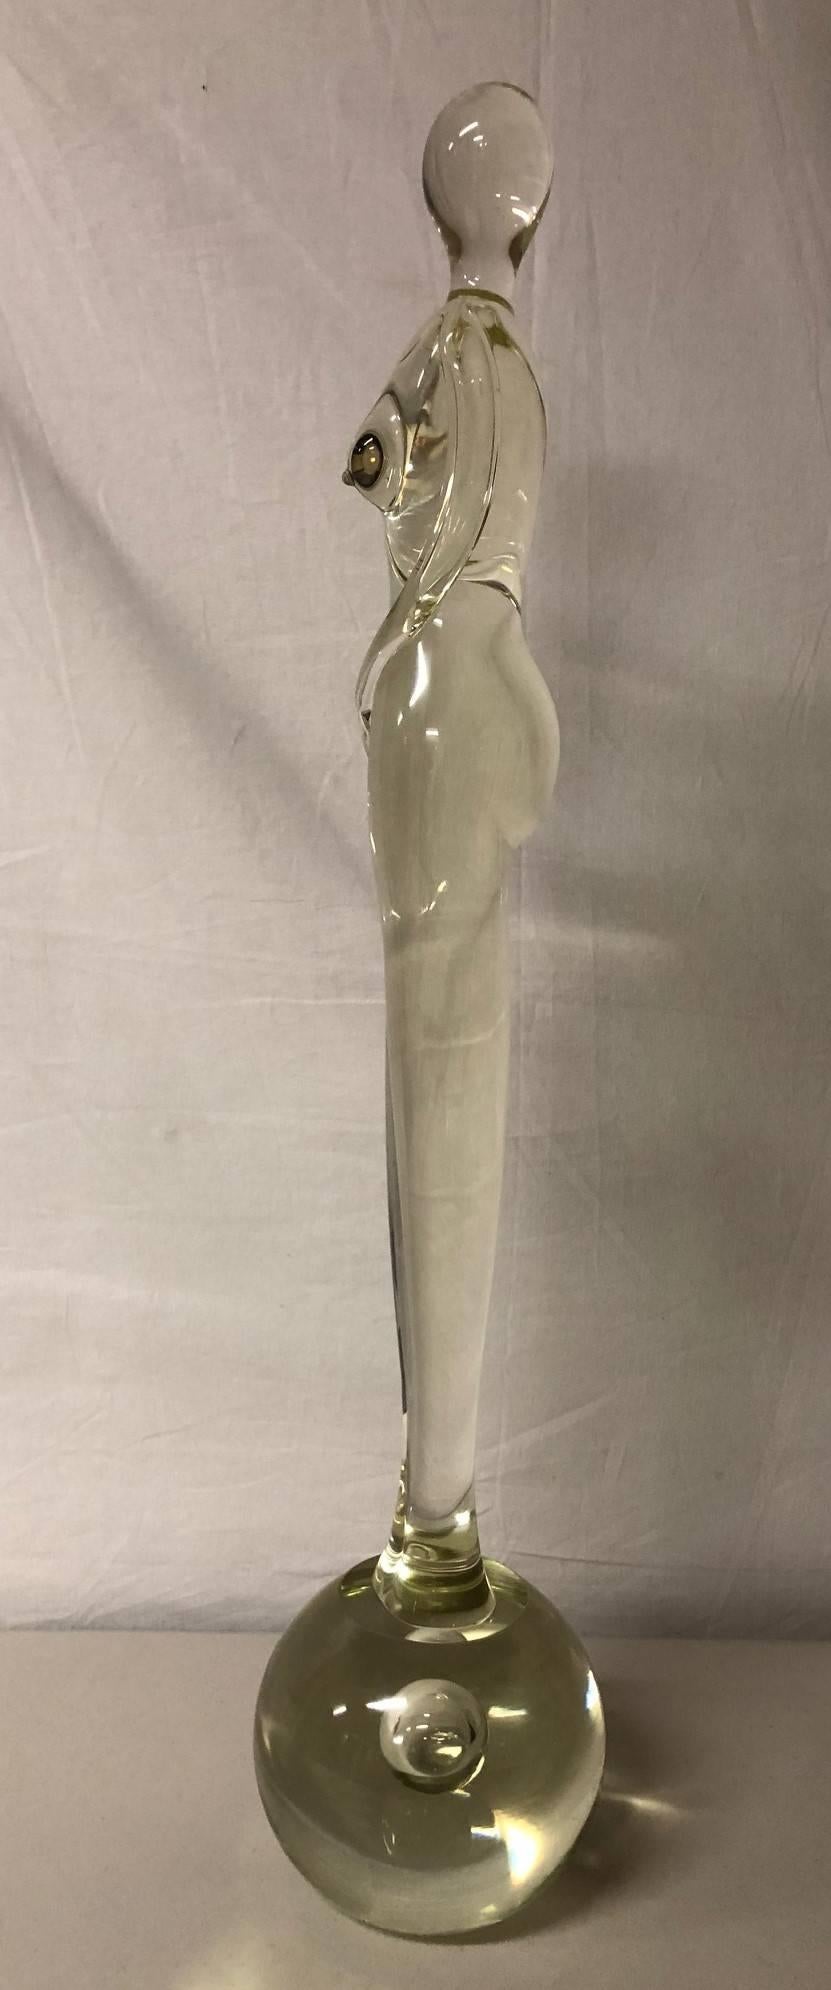 Italian Sleek, Modernist Form Nude Woman Sculpture on Round Glass Base by Murano Glass